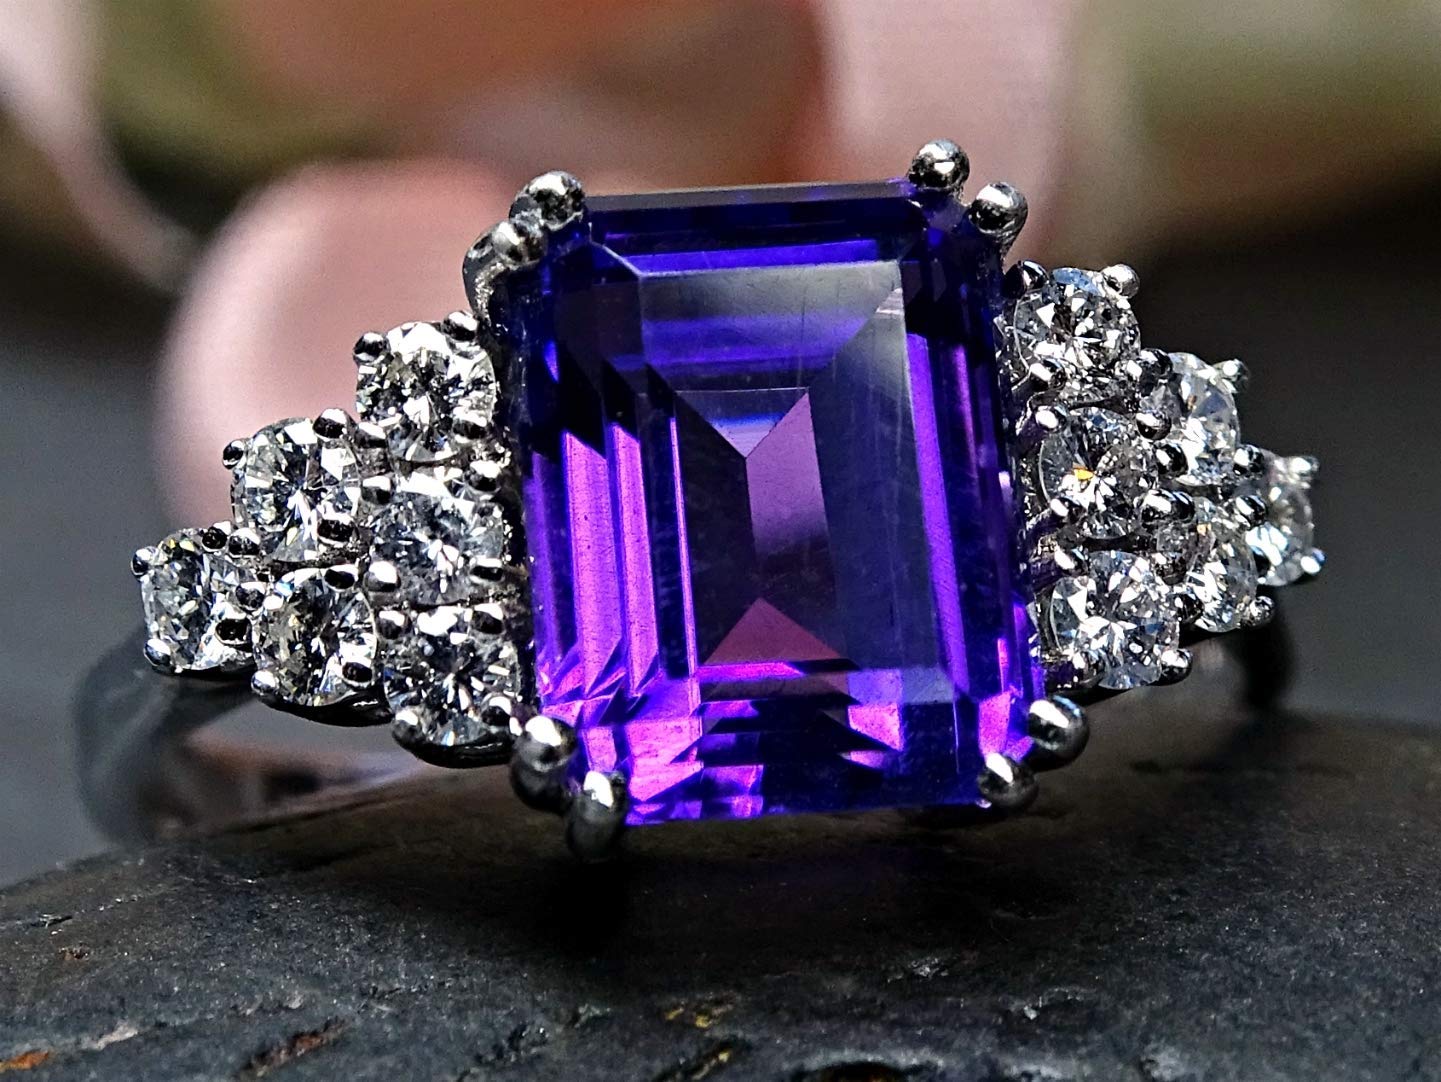 Share 145+ purple engagement rings best - awesomeenglish.edu.vn